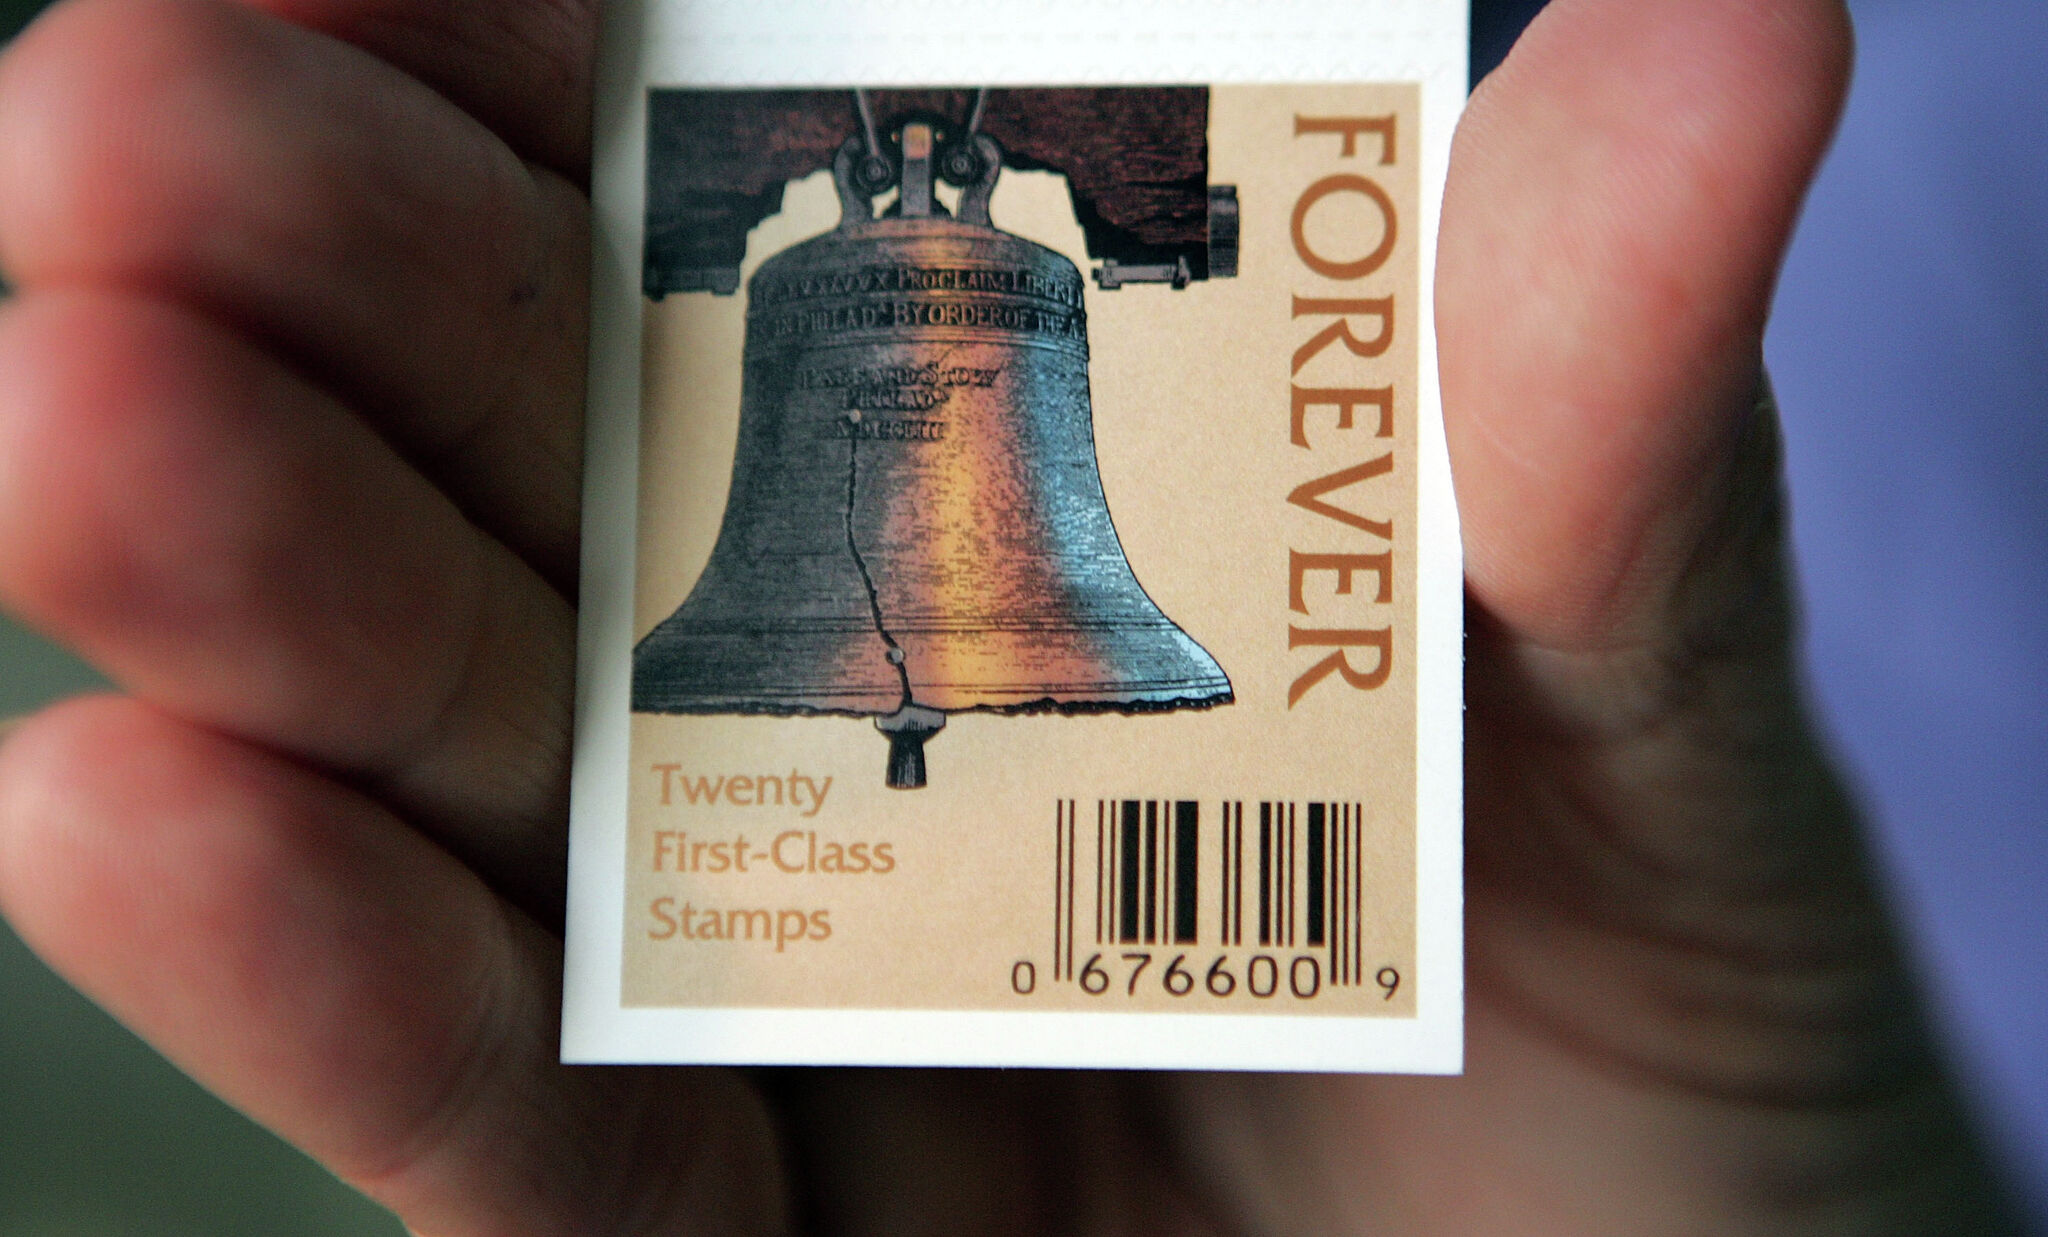 Forever Stamp Prices Surge to $0.68, July Hike Ahead